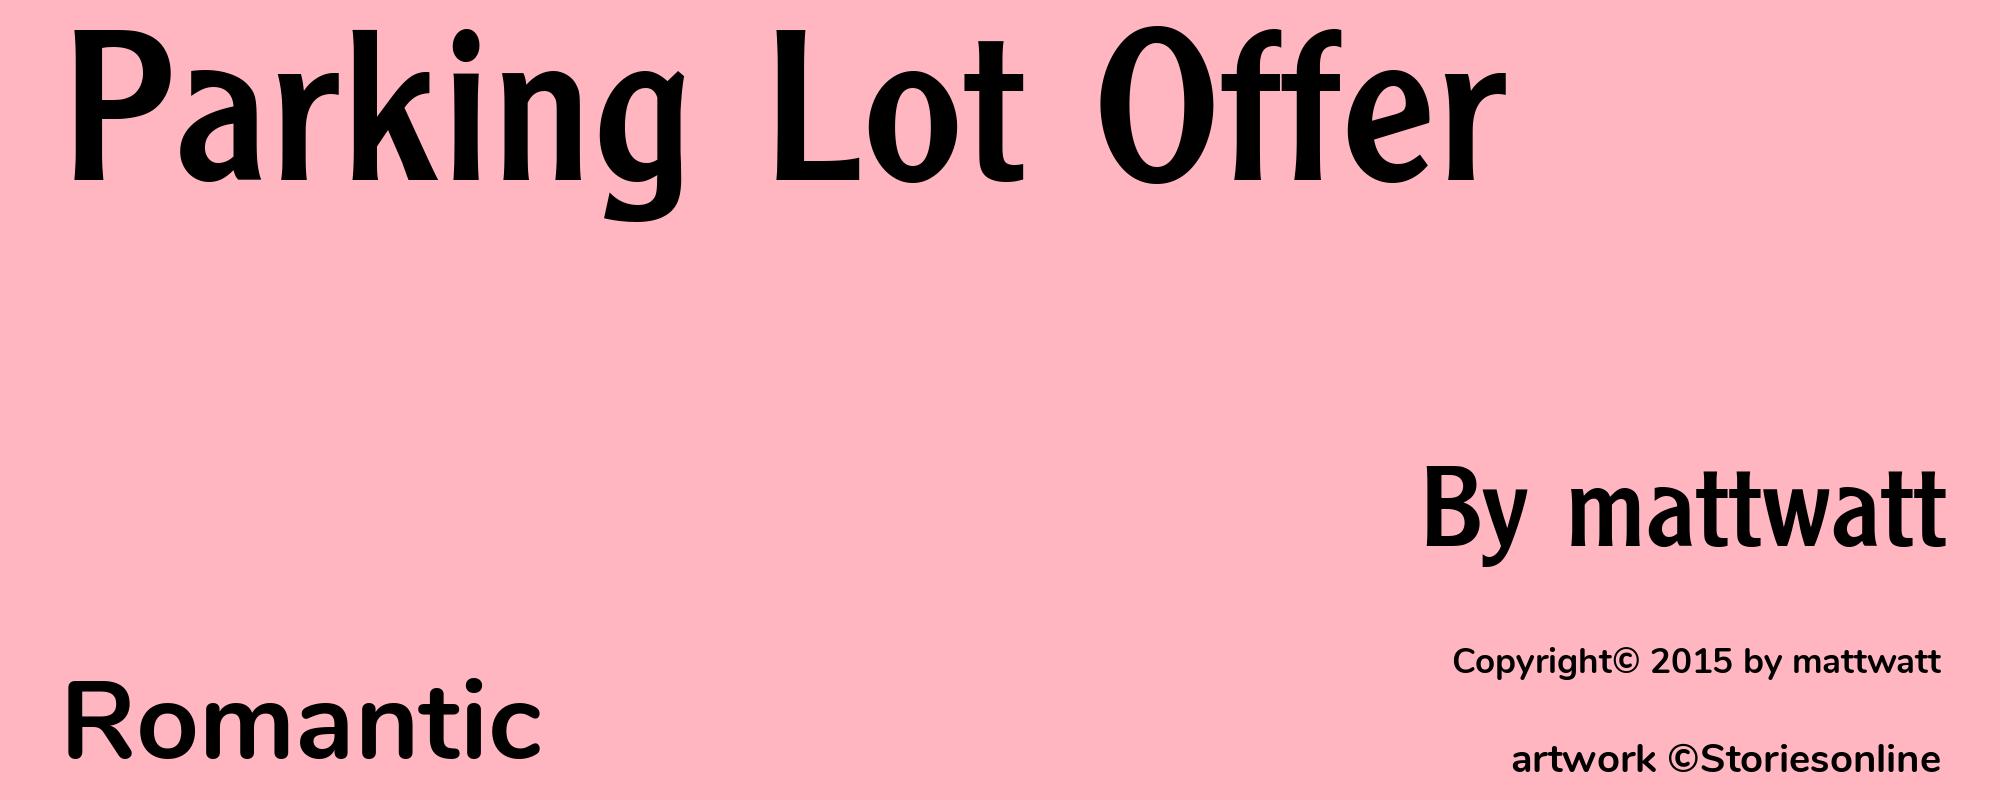 Parking Lot Offer - Cover